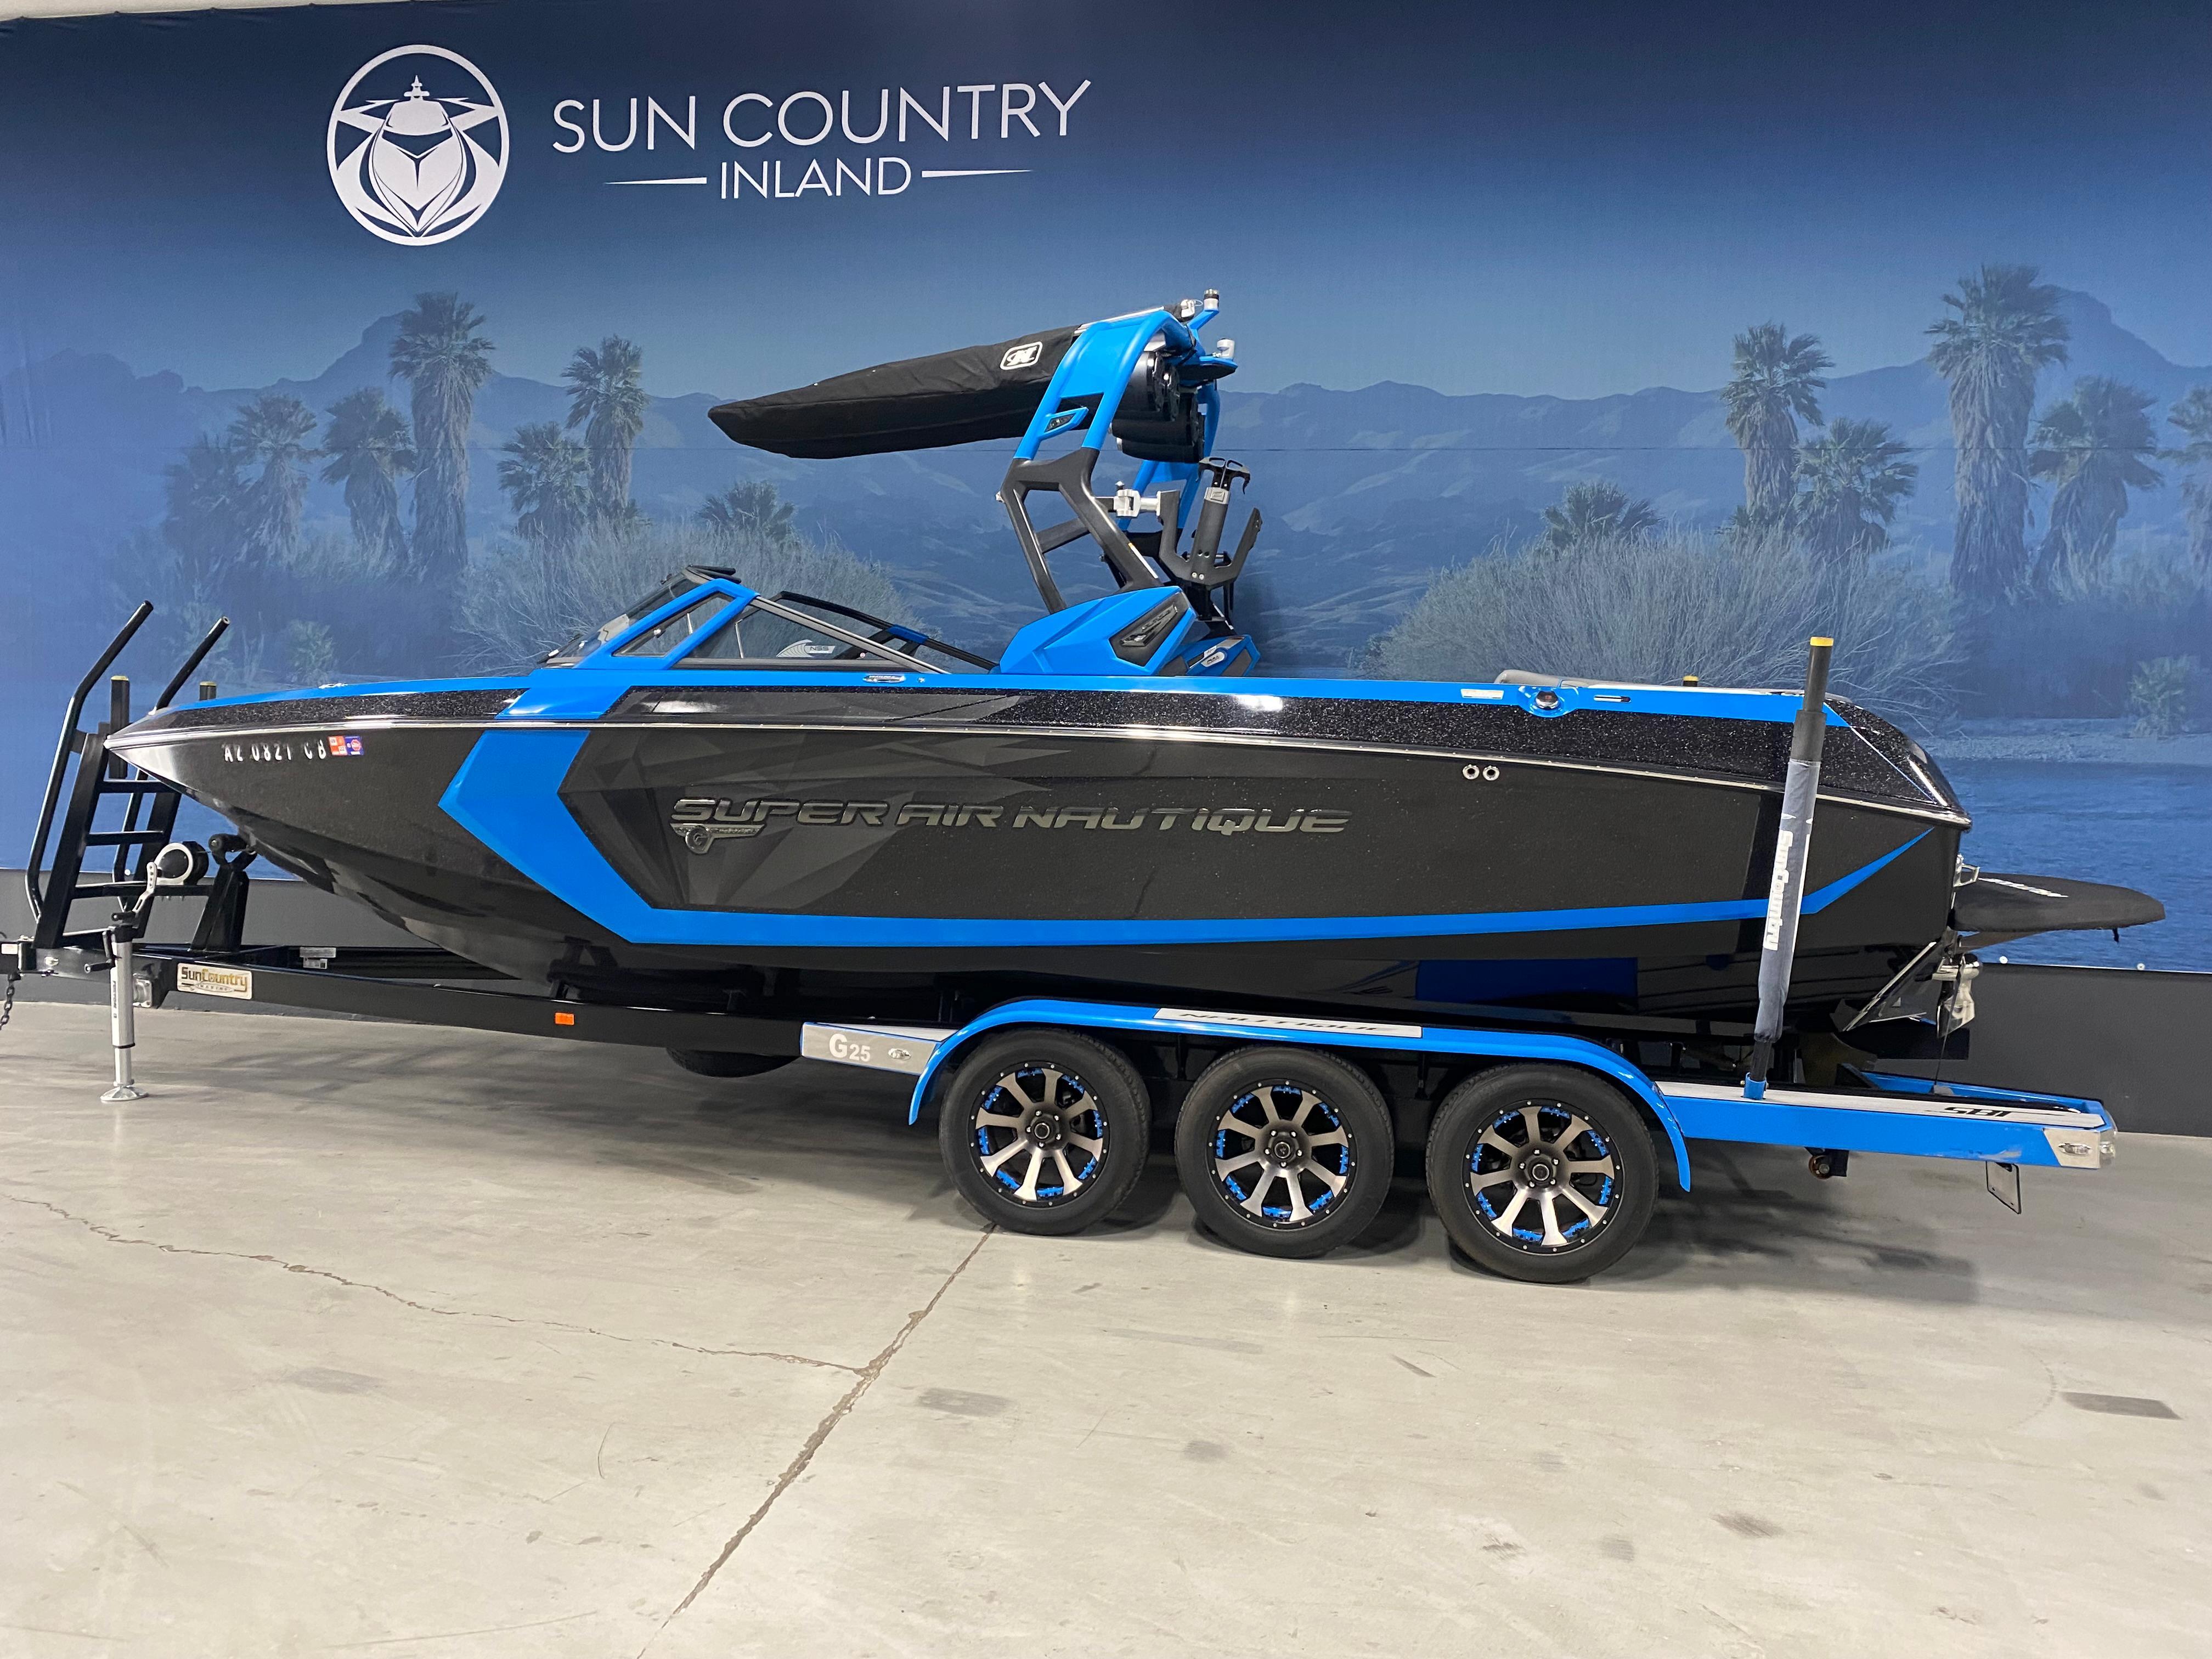 Super Air Nautique Rc Boat: High-performance design and durability for endless fun and realism on the water